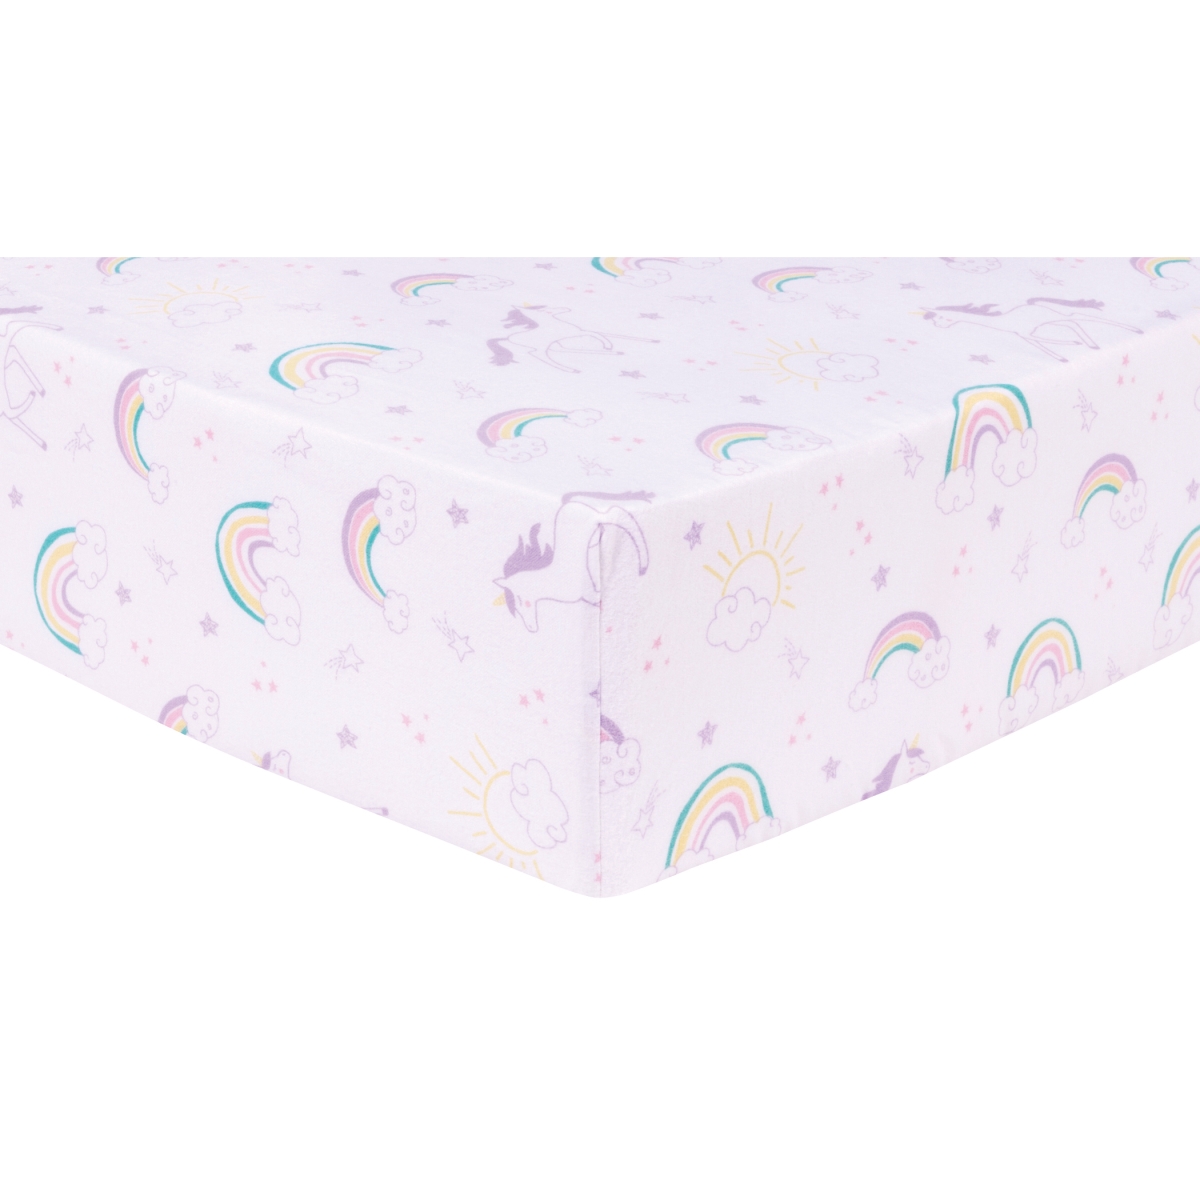 103167 28 X 52 In. Unicorn Rainbow Deluxe Flannel Fitted Crib Sheet - Assorted Color